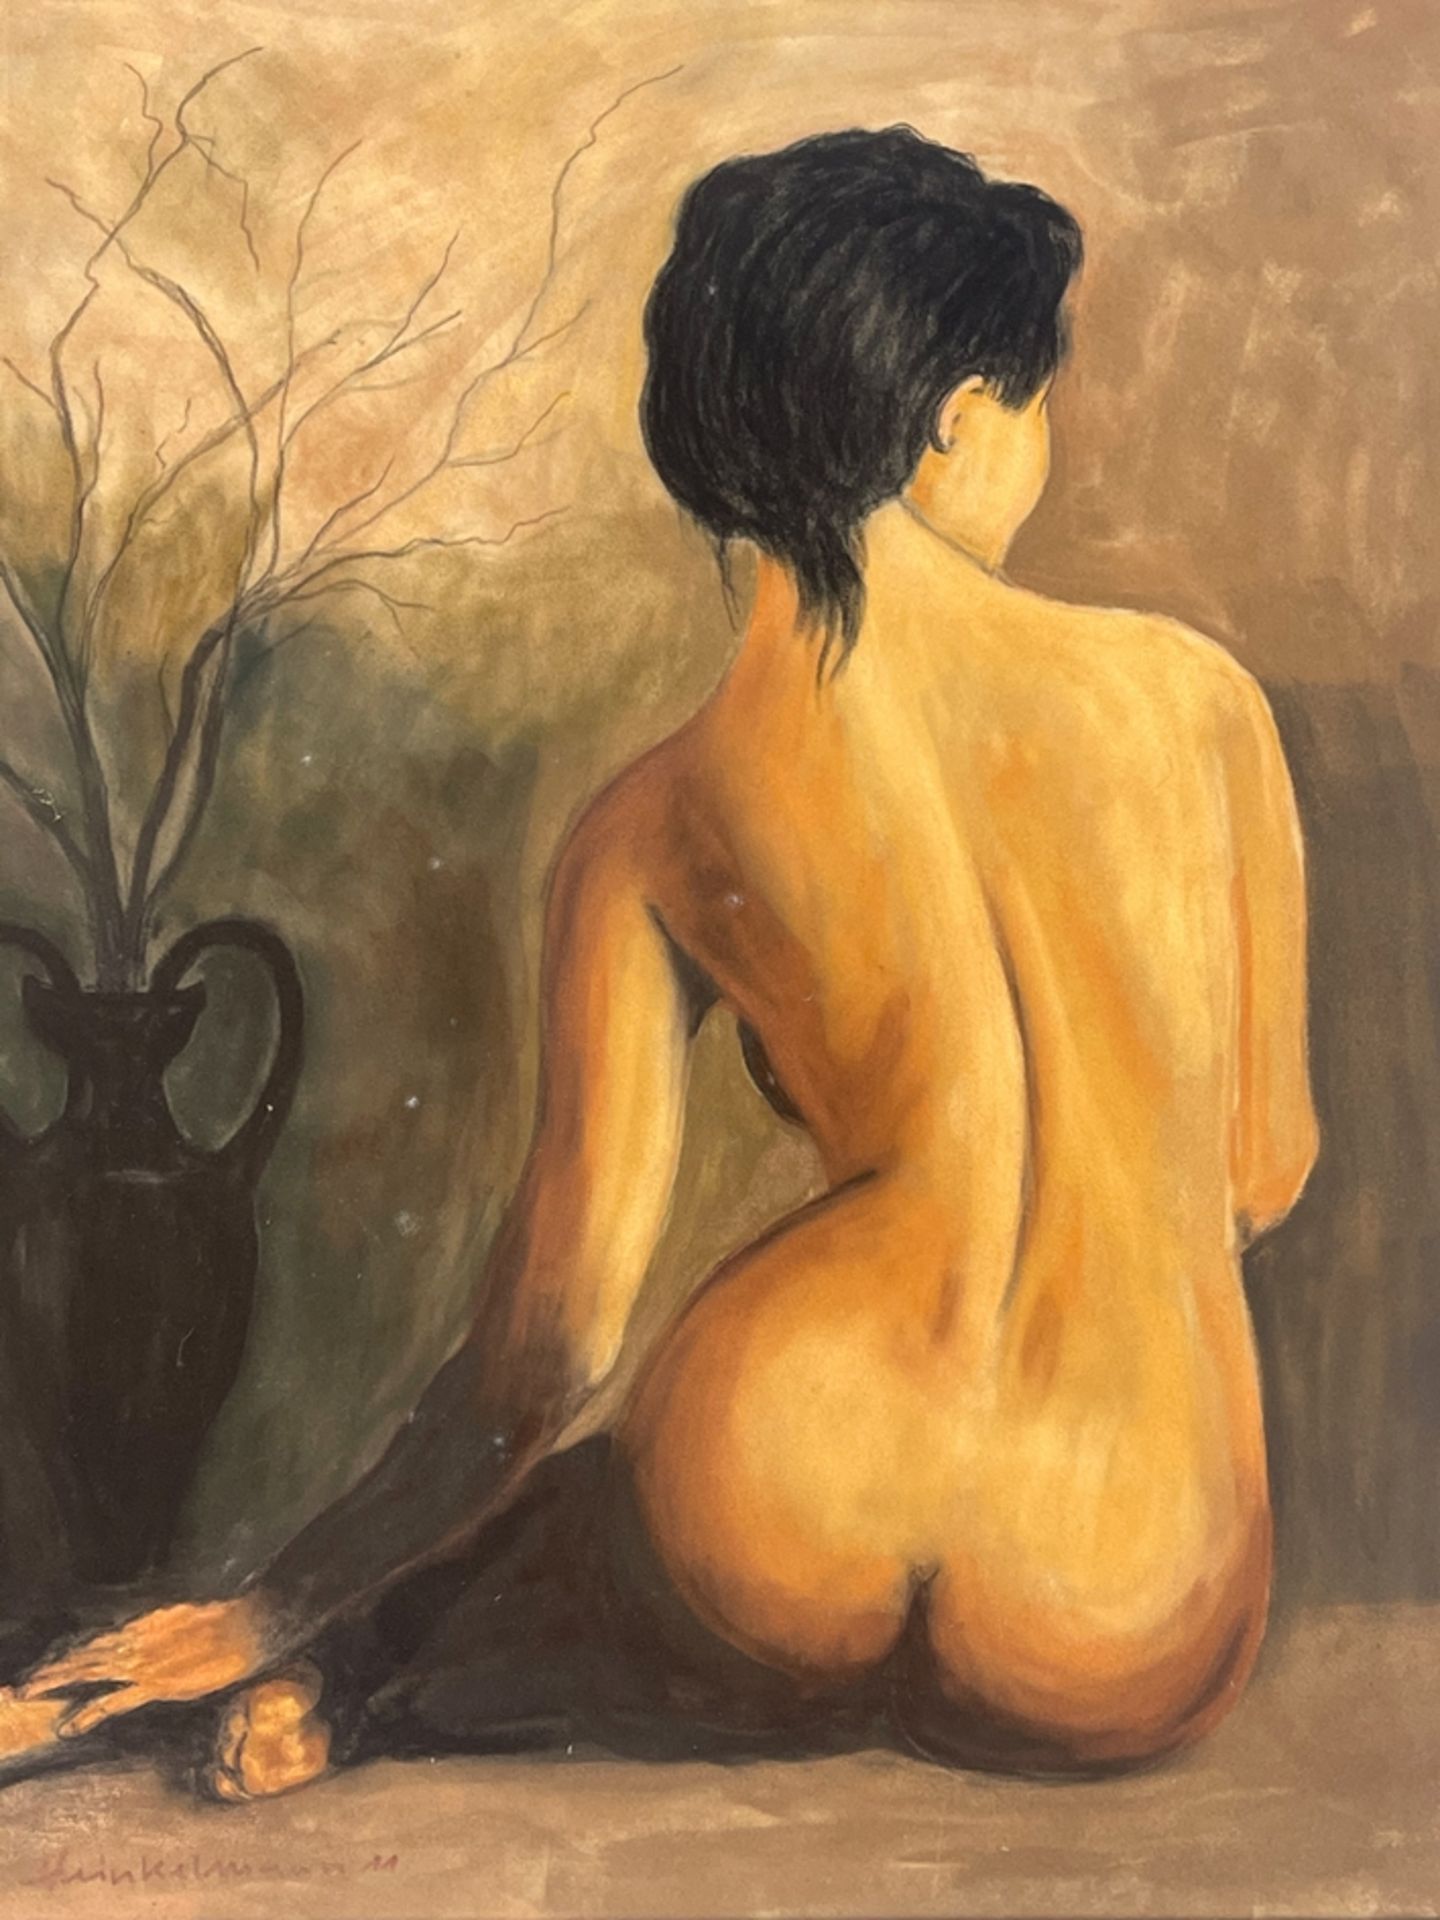 Painting backview of a woman - Image 2 of 3